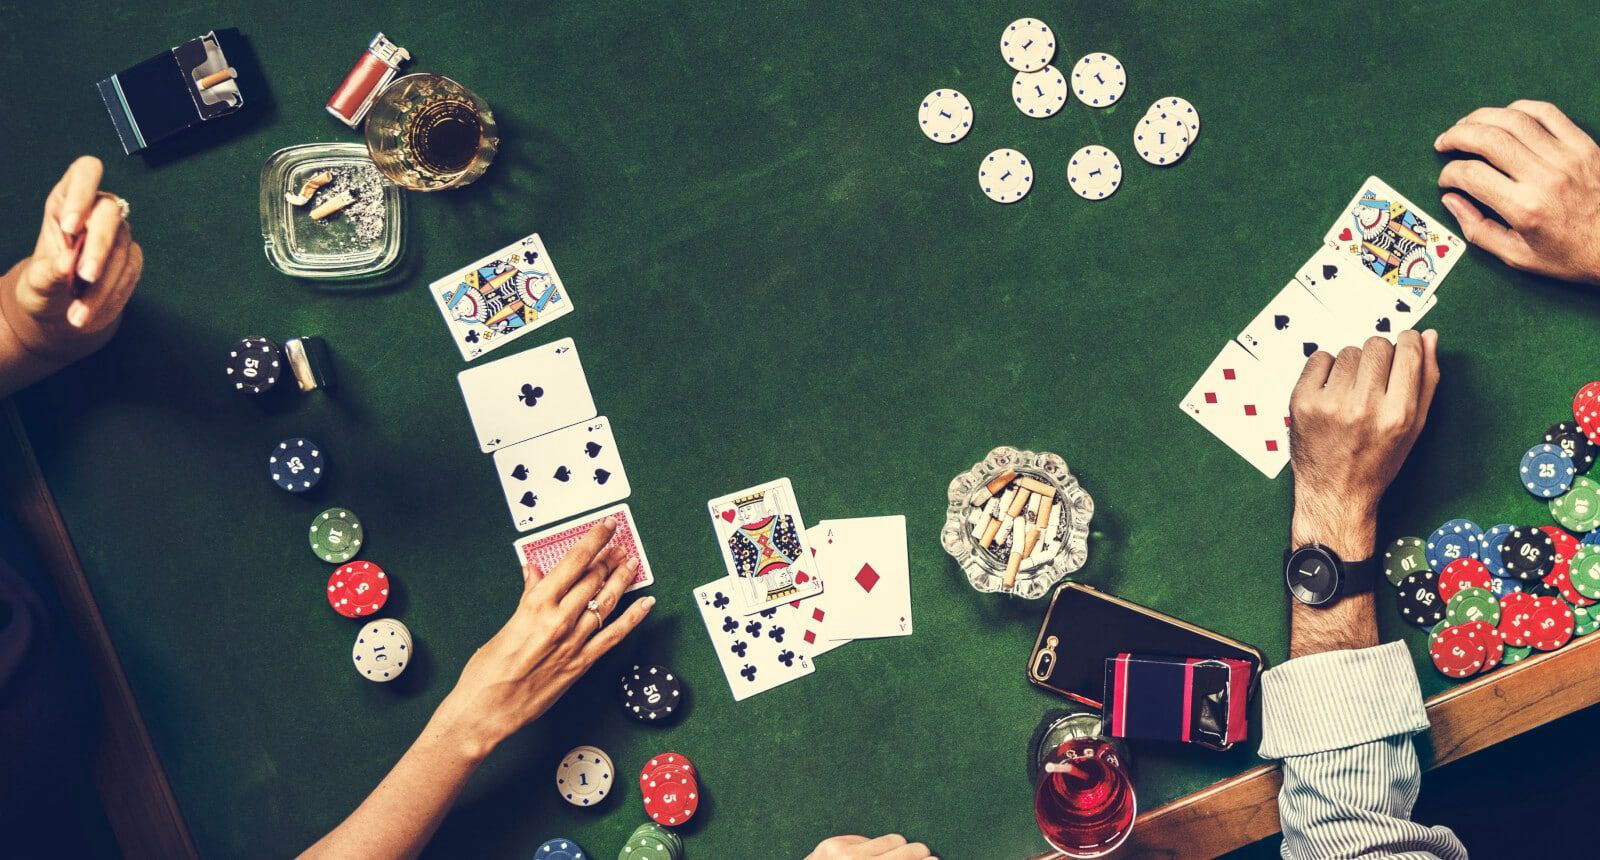 Read more about the article Debunking the Top 5 Casino Myths: What You Need to Know Before You Play | The African Exponent.